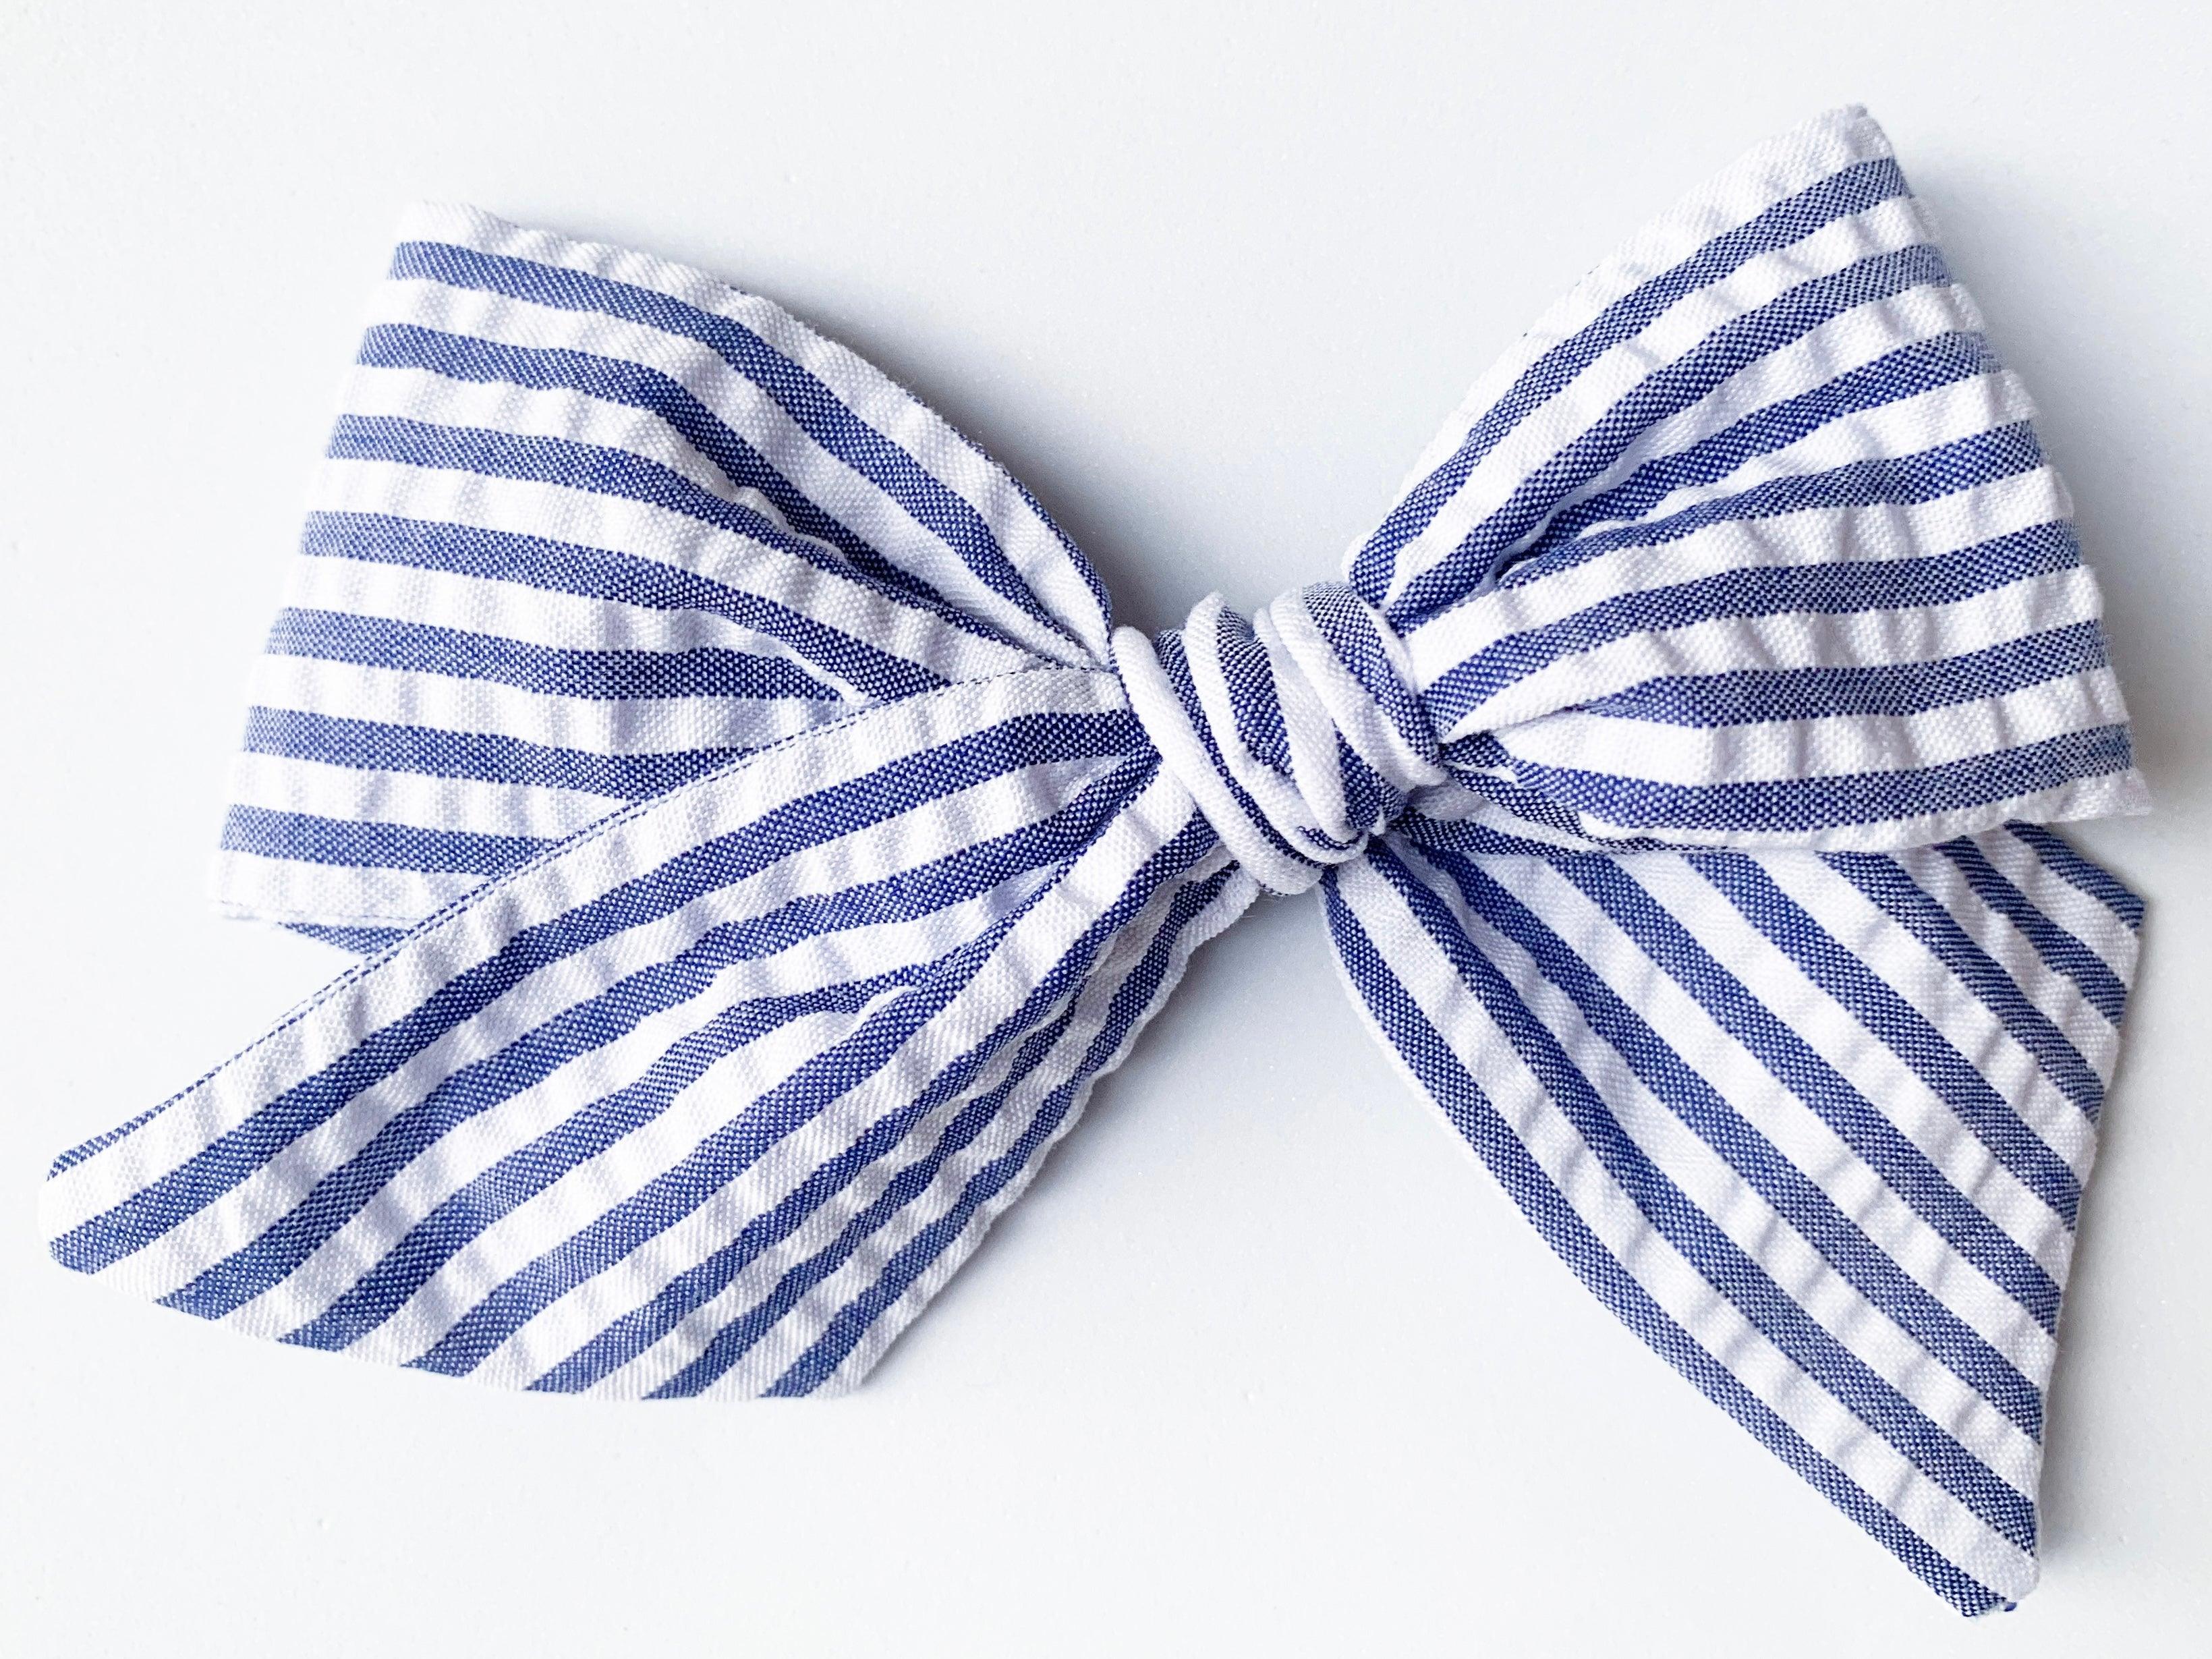 Jumbo Pinwheel Bow - Navy Seersucker | Nashville Bow Co. - Classic Hair Bows, Bow Ties, Basket Bows, Pacifier Clips, Wreath Sashes, Swaddle Bows. Classic Southern Charm.